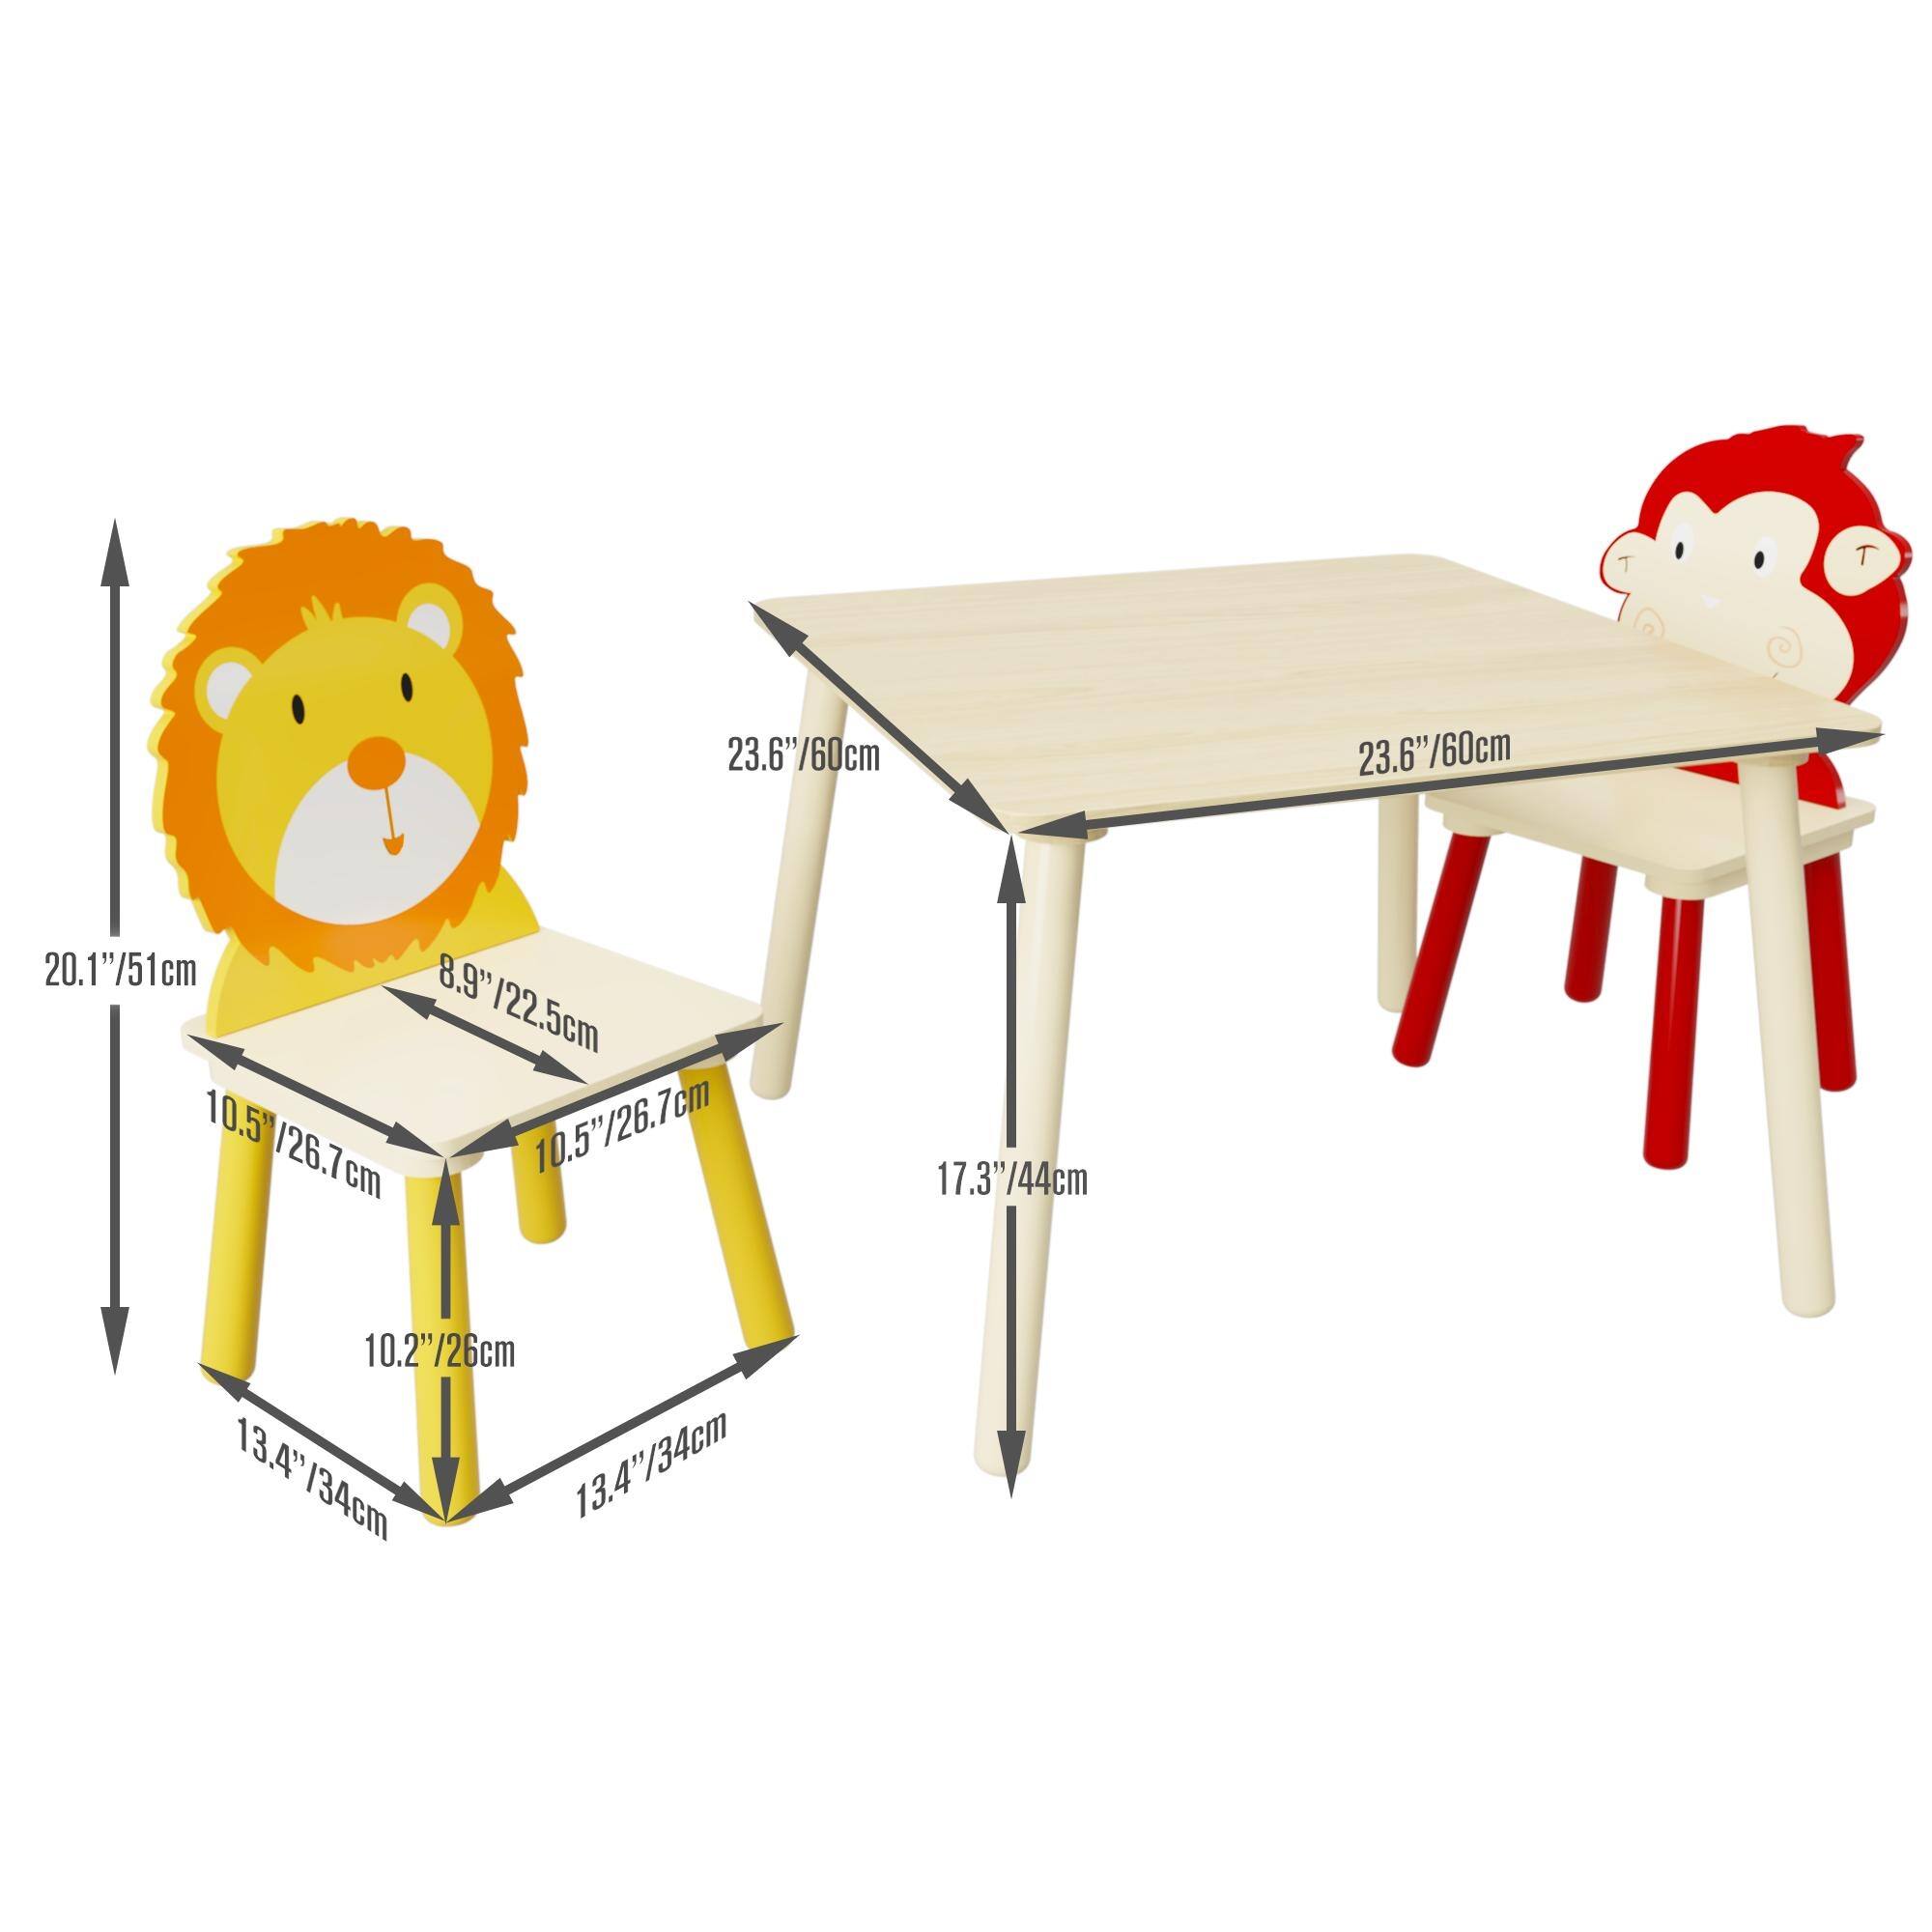 Wooden Kids Activity Play Table Set, 1 Kids Table and 2 Chairs,Set of 3